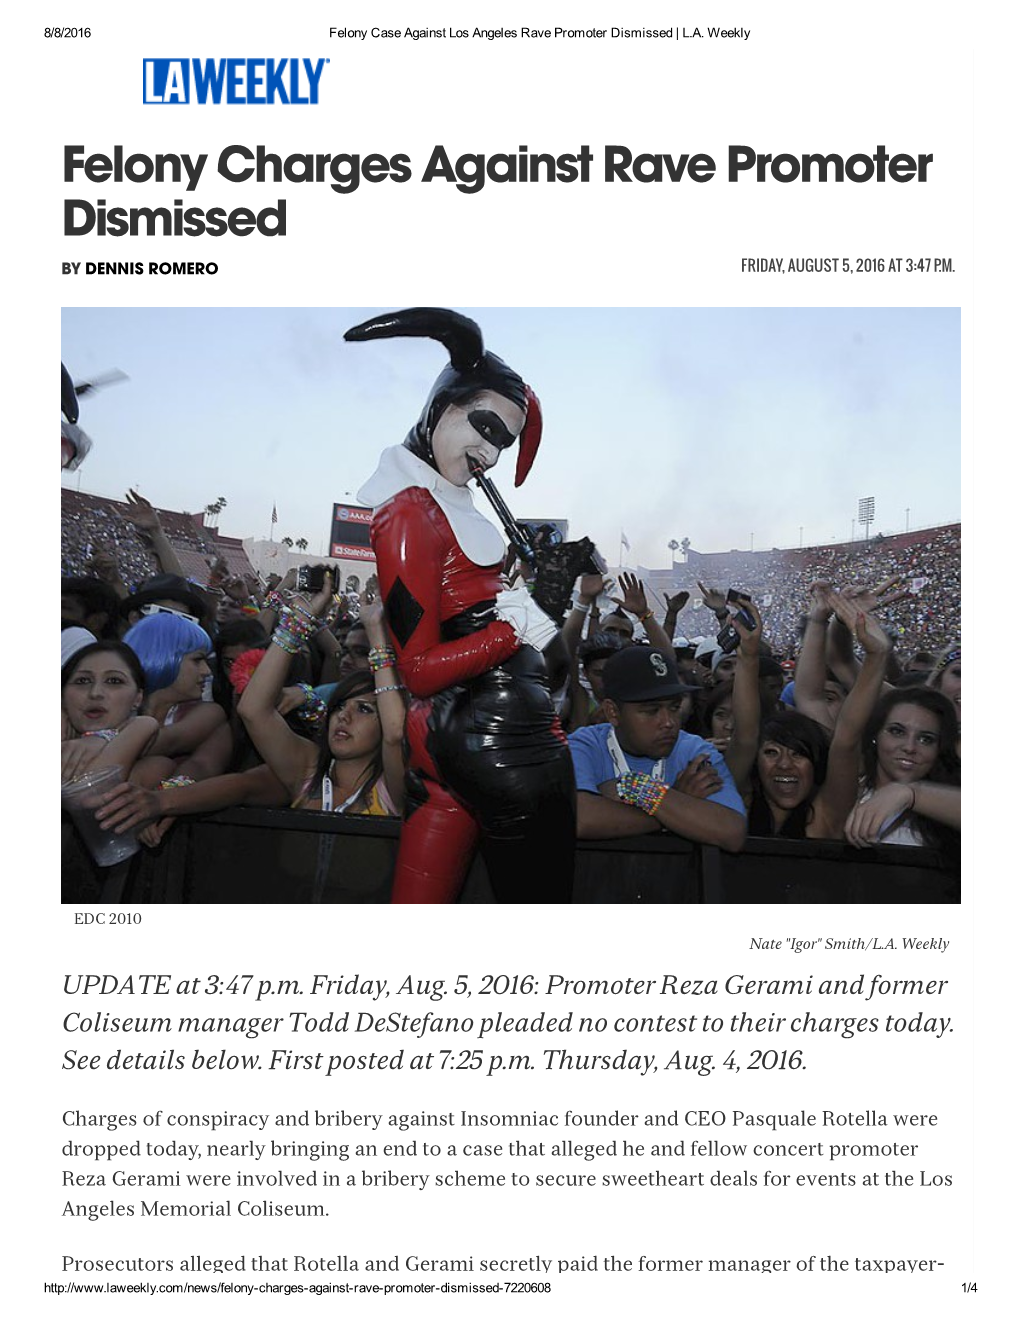 Felony Charges Against Rave Promoter Dismissed by DENNIS ROMERO FRIDAY, AUGUST 5, 2016 at 3:47 P.M